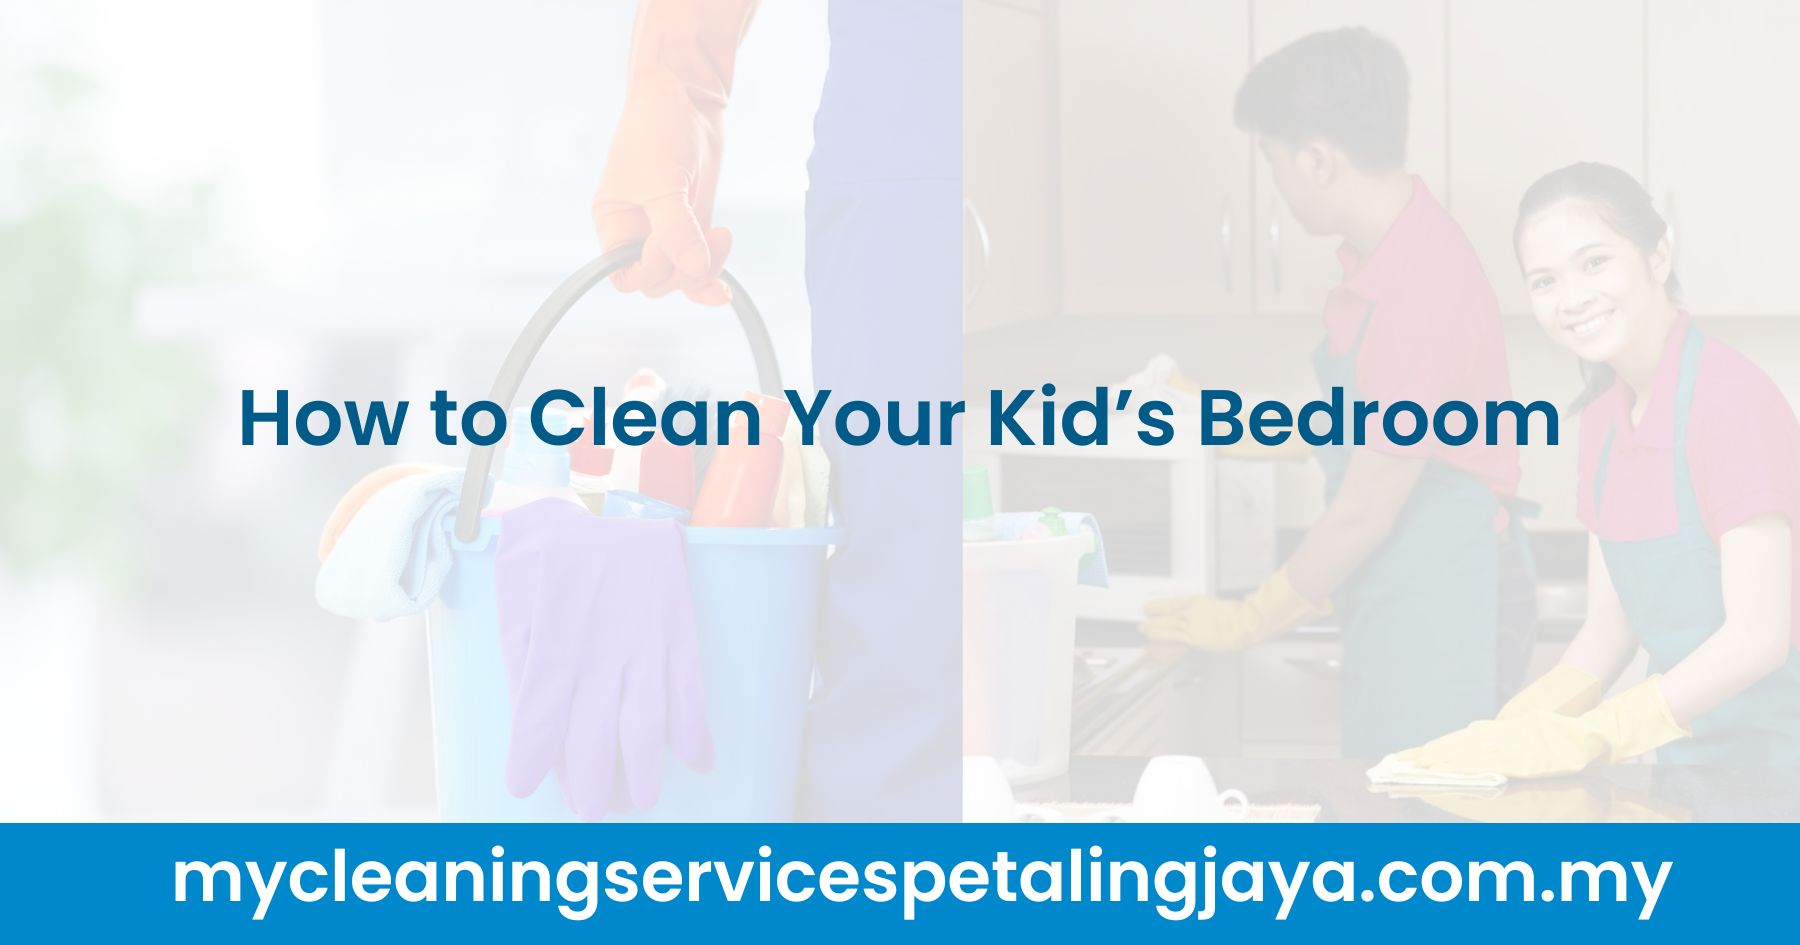 How to Clean Your Kid’s Bedroom